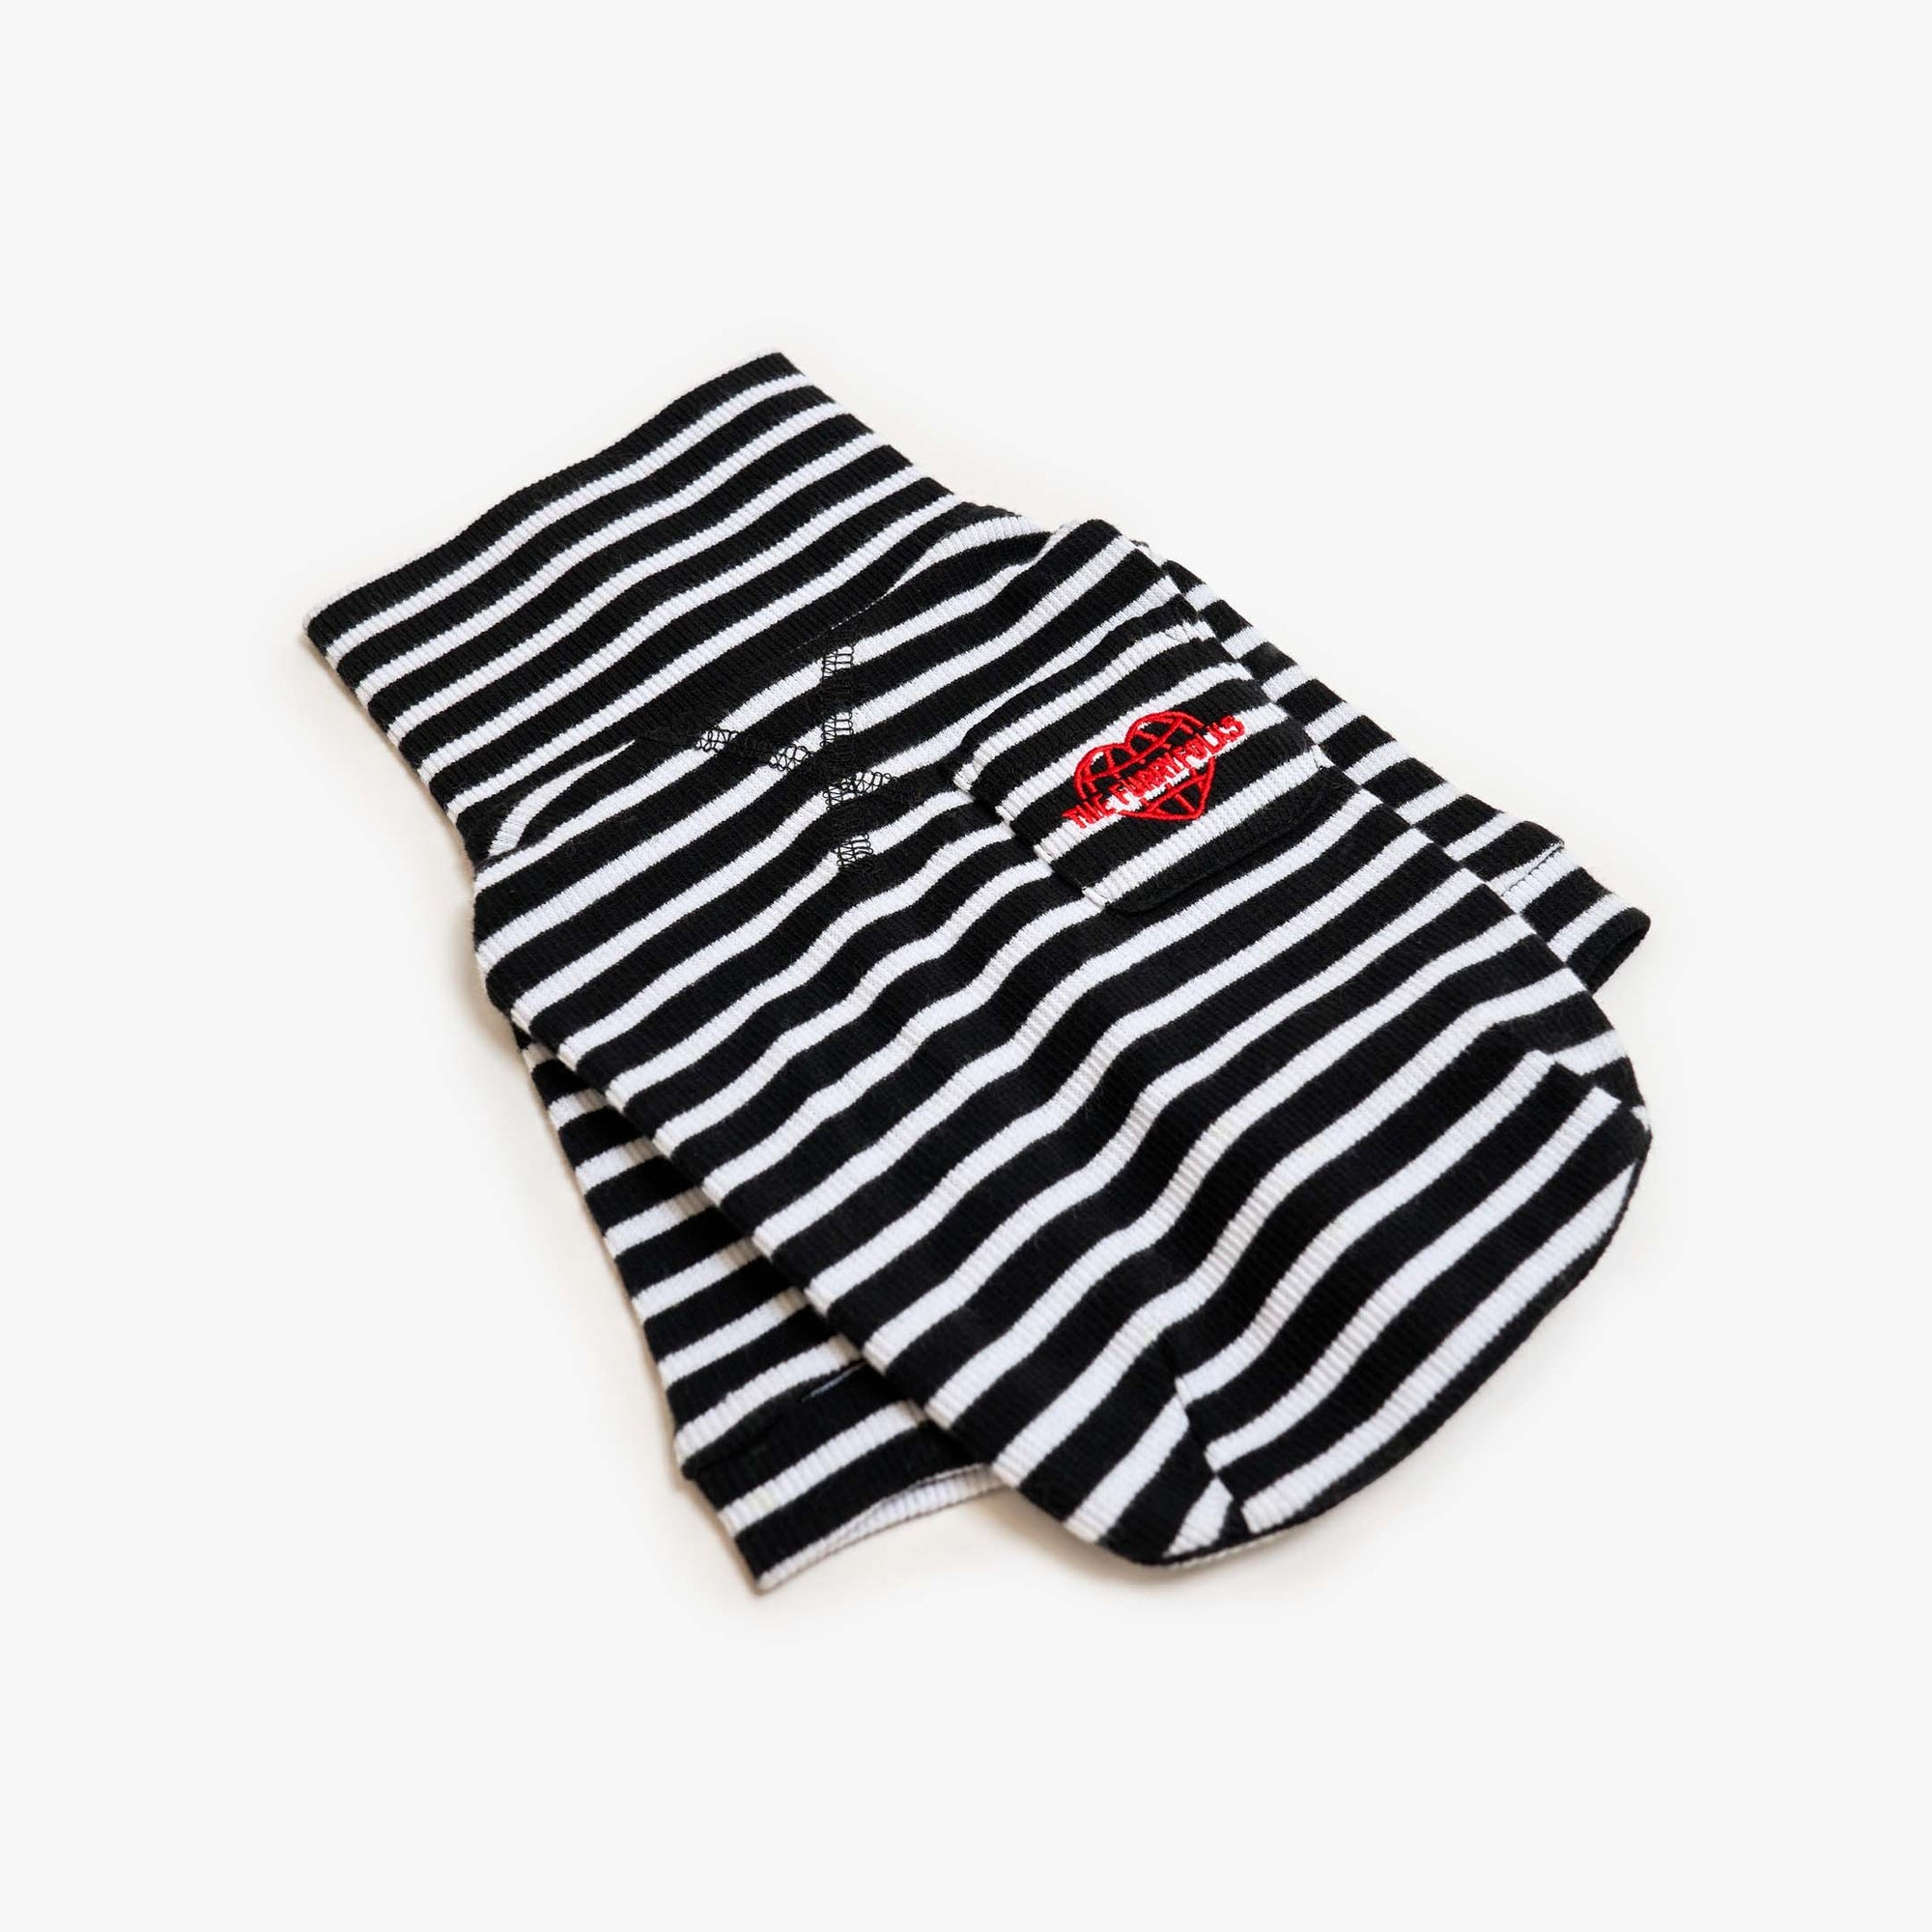 Black and white striped dog shirt with the furryfolks a heart logo, offering a chic and comfortable fit for your pet.